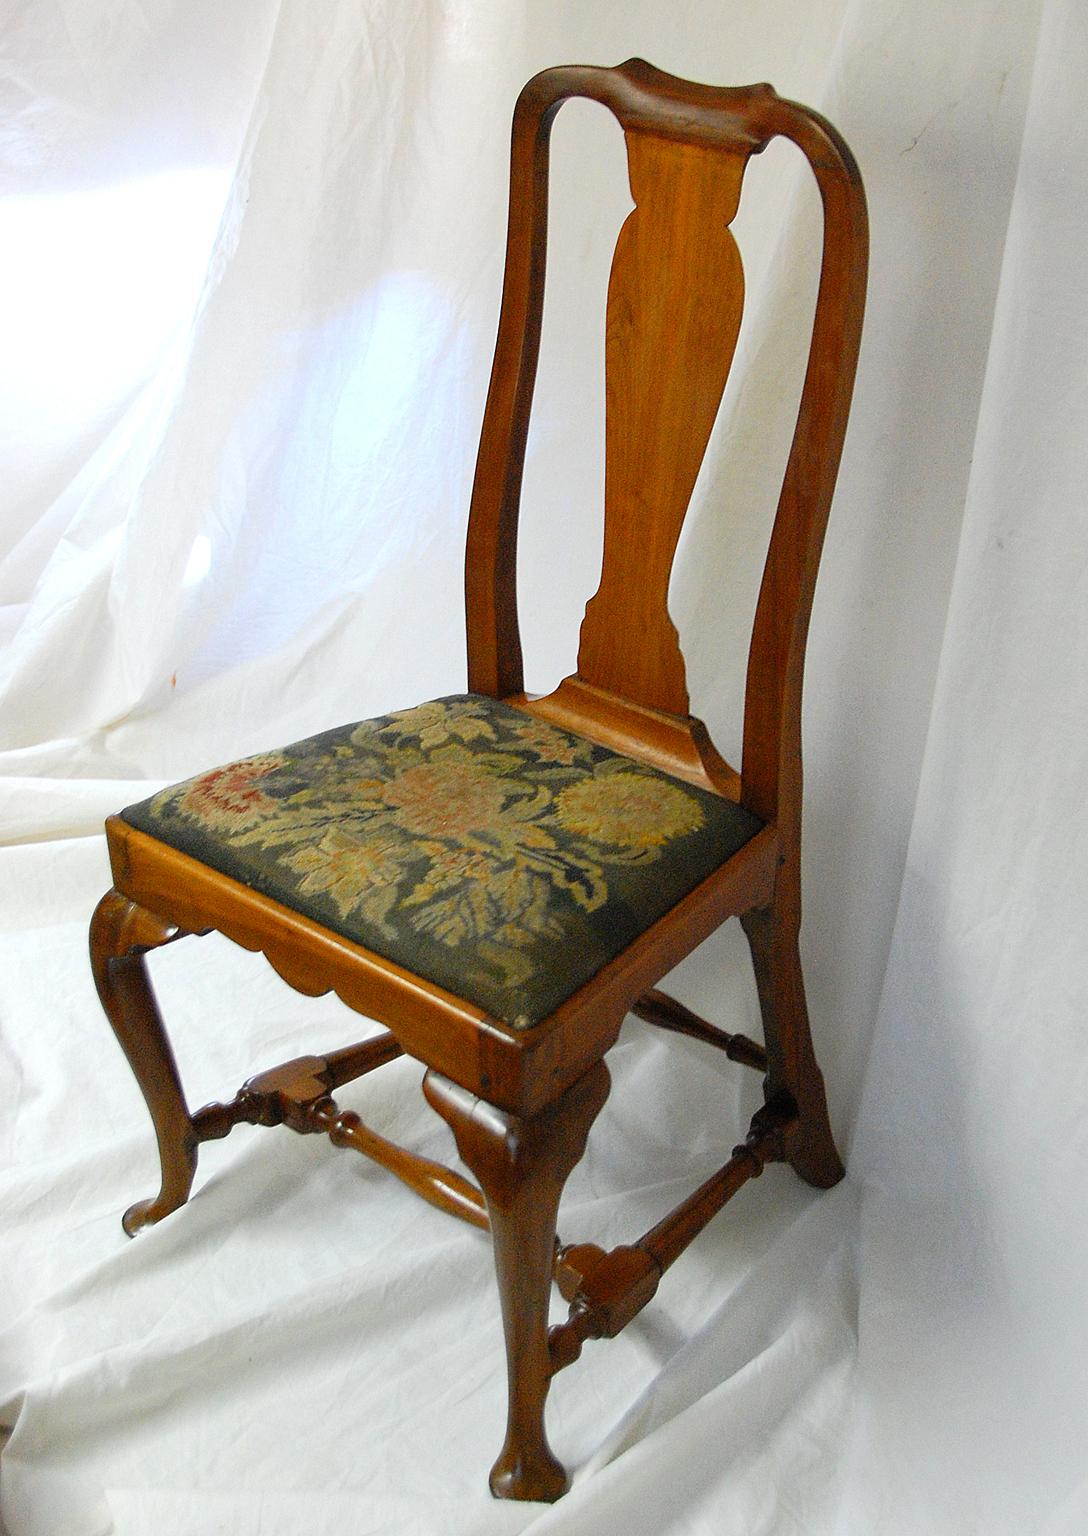 American Queen Anne period walnut sidechair from a Boston cabinetmaker. This elegant chair is distinguished by its cabriole legs, pad feet and vase form splat. The block and turned cross stretcher provides extra strength while the shaped skirt adds